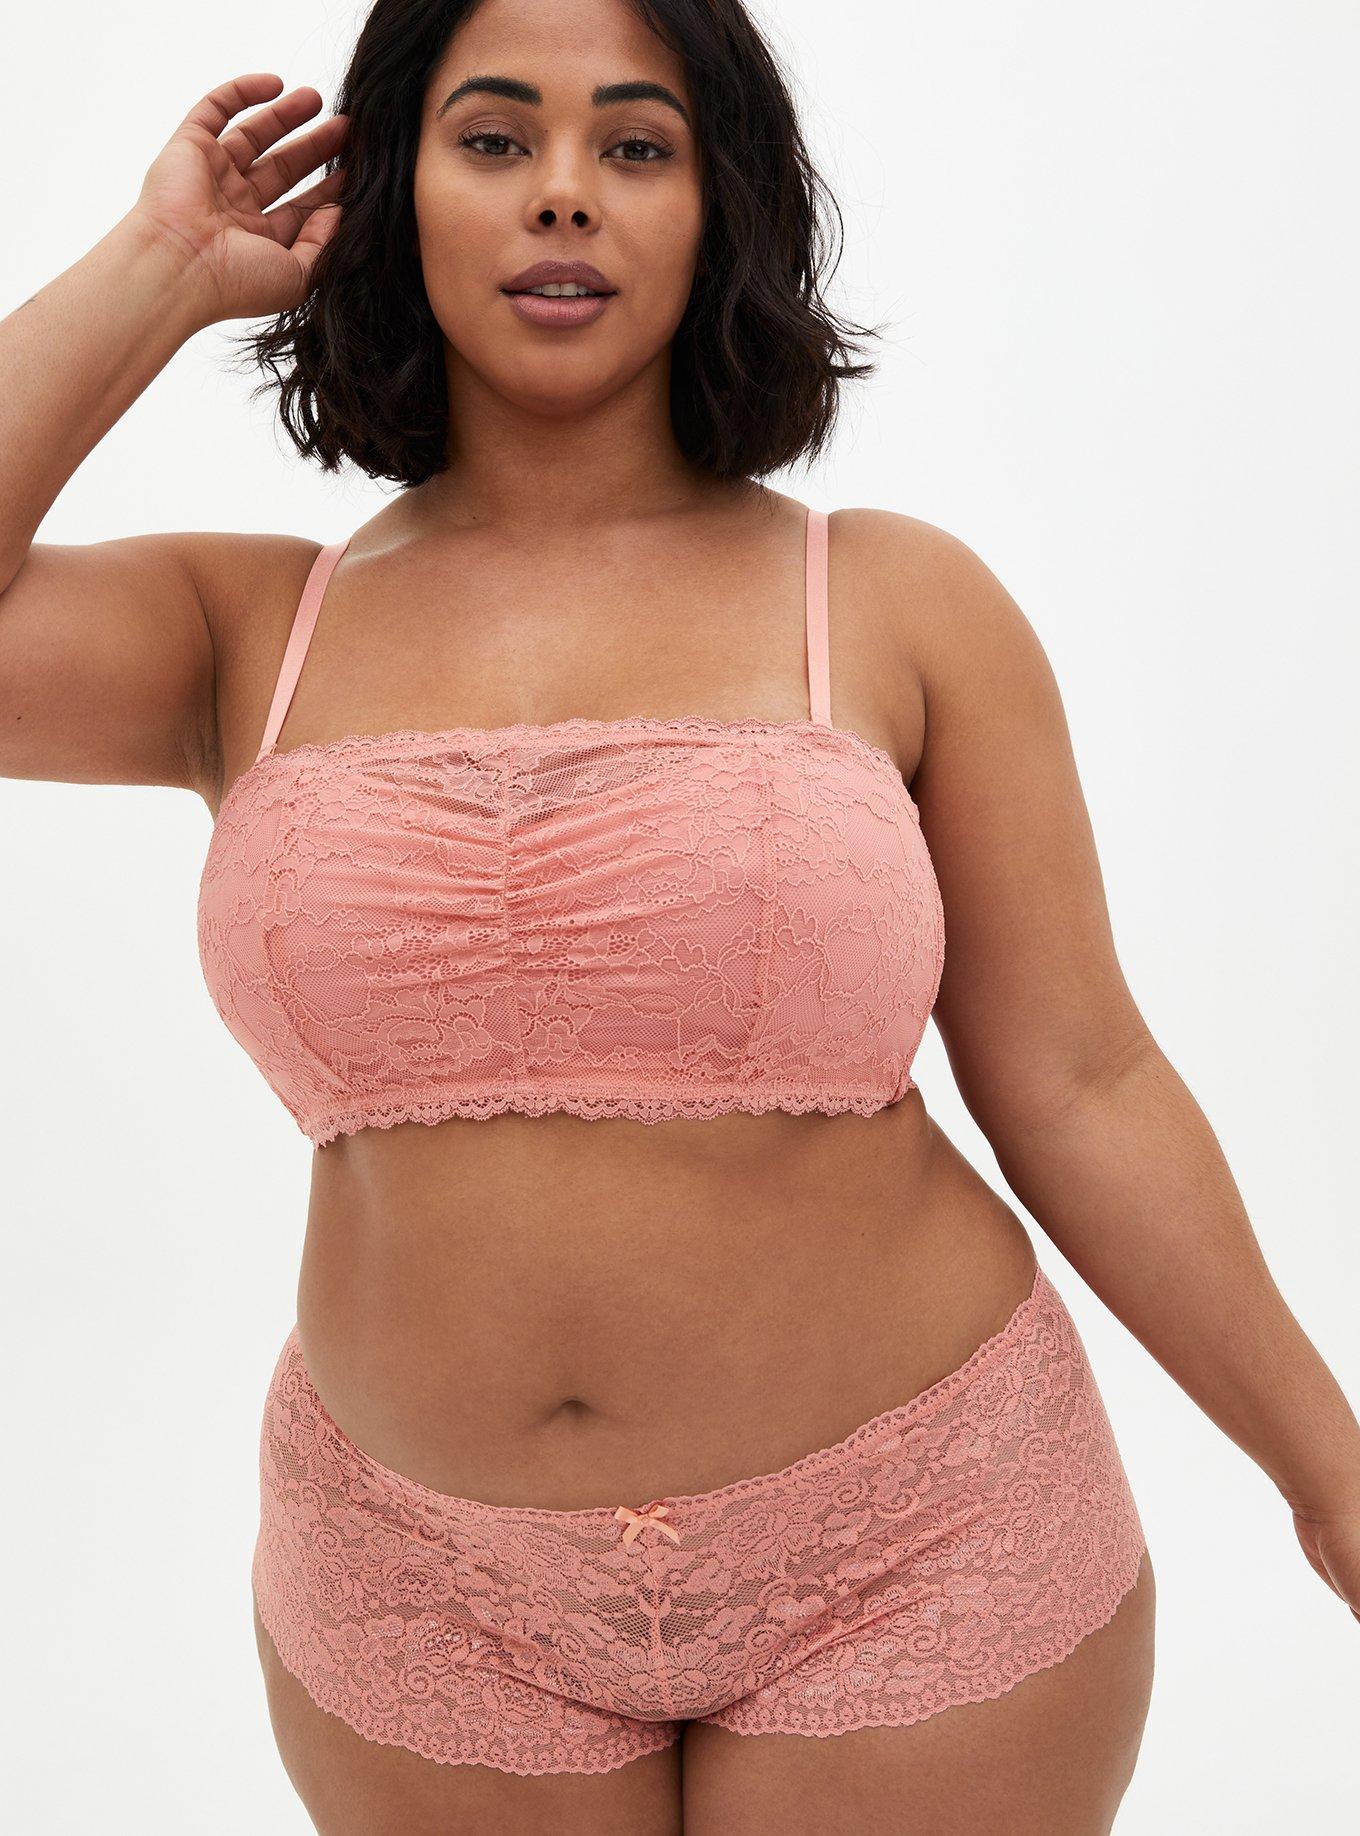 Does anyone own this top with bigger boobs? I think I'm a DD right now. I'm  nursing and stoping soon, and hoping I go back down to my normal cup size.  For